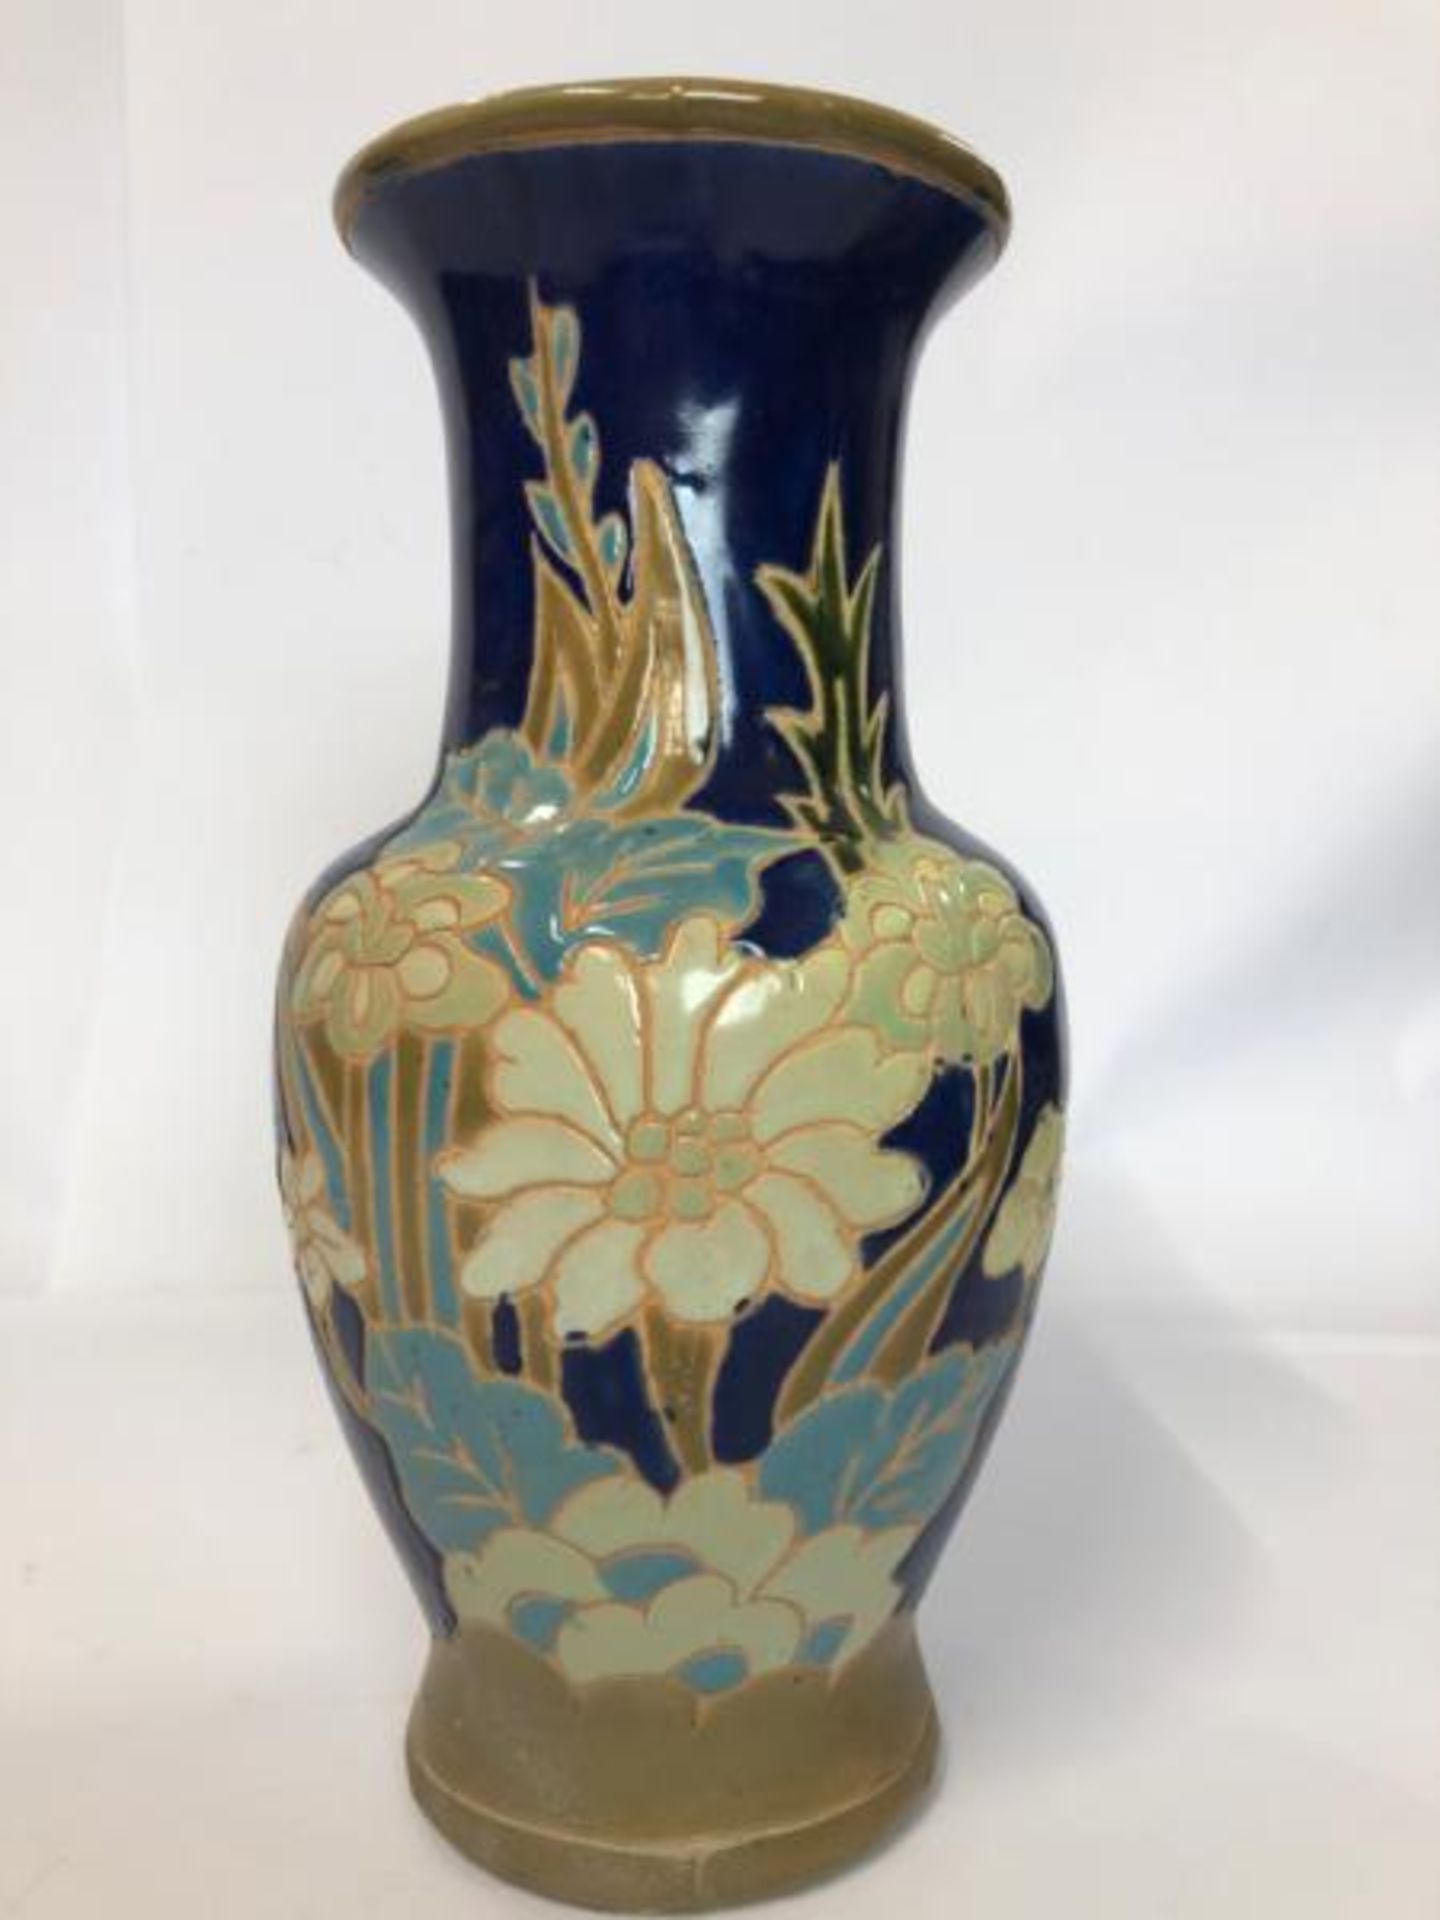 Six assorted vases including a large floor vase decorated with peacocks, 55cm high and a pair of - Image 8 of 14